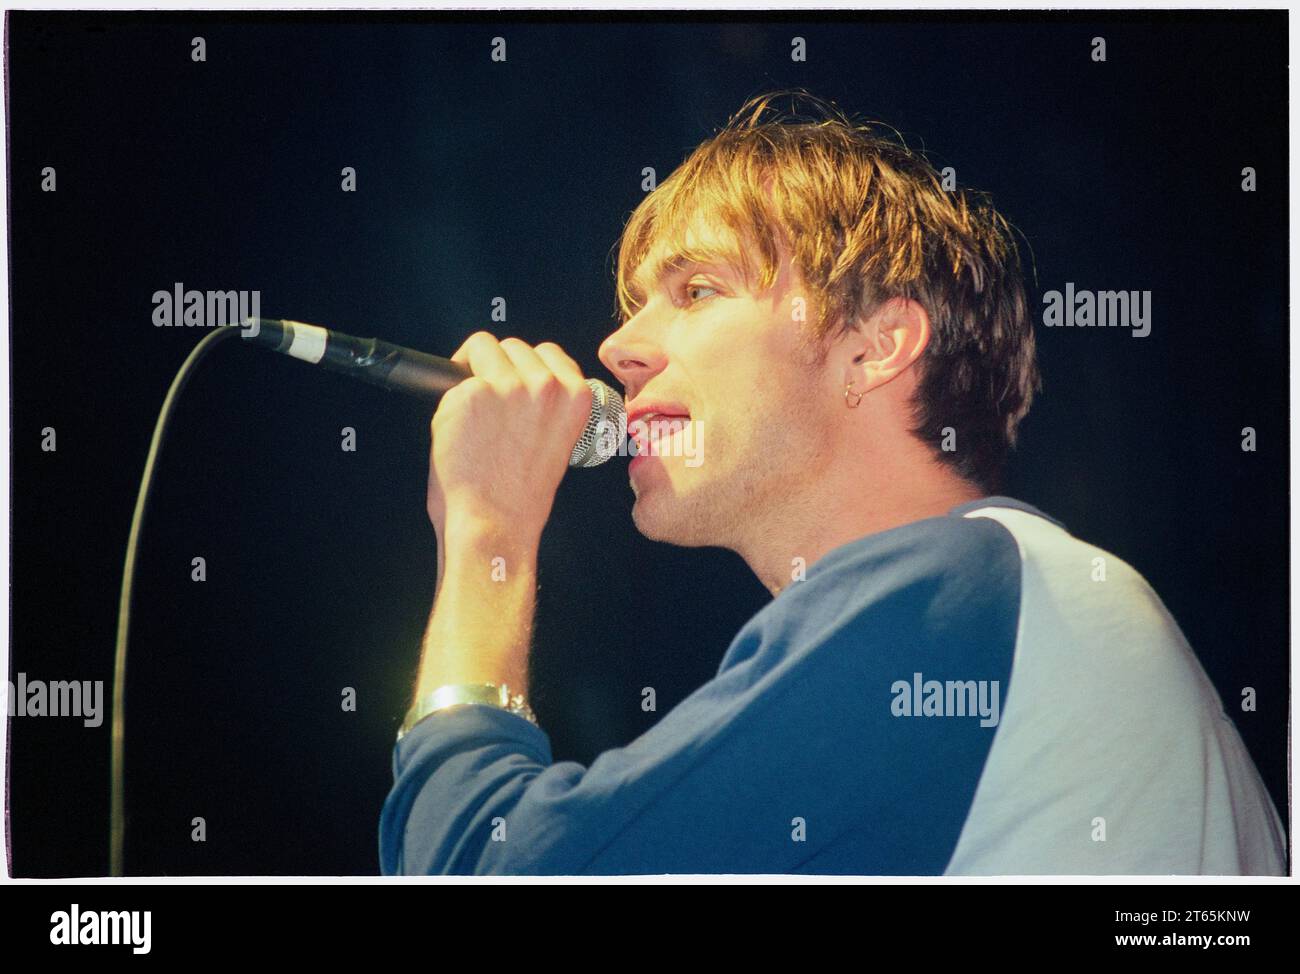 DAMON ALBARN, BLUR, 1995: Damon Alban the singer of Blur at the very height of Britpop mania just after Country House beat Oasis to the top of the charts on the Great Escape Tour at Cardiff International Arena in Cardiff,  Wales, UK on 5 December 1995. Photo: Rob Watkins Stock Photo